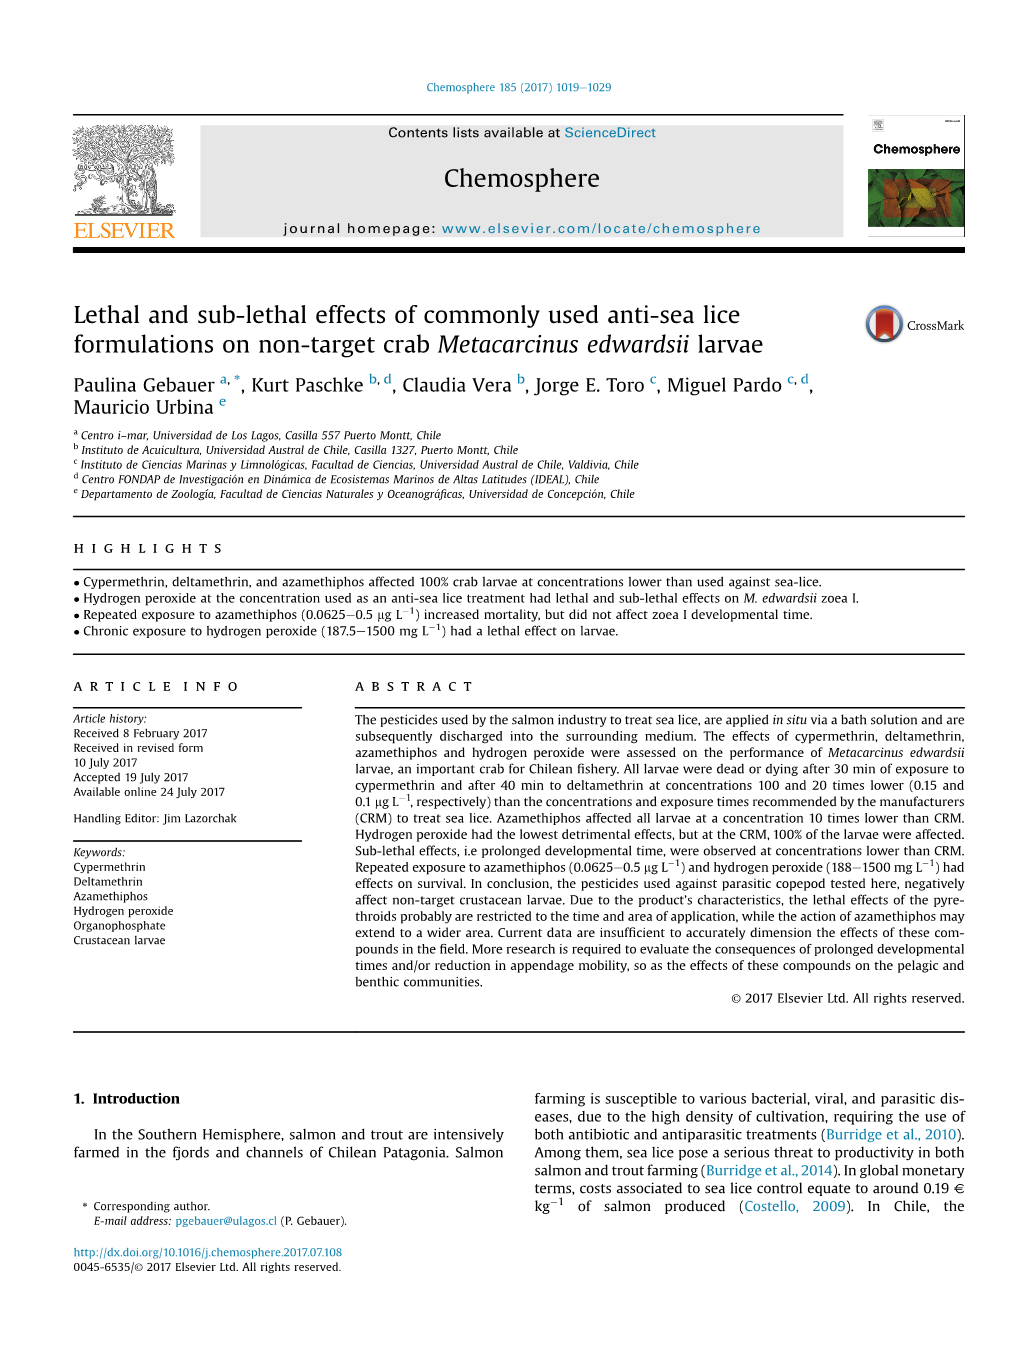 Lethal and Sub-Lethal Effects of Commonly Used Anti-Sea Lice Formulations on Non-Target Crab Metacarcinus Edwardsii Larvae